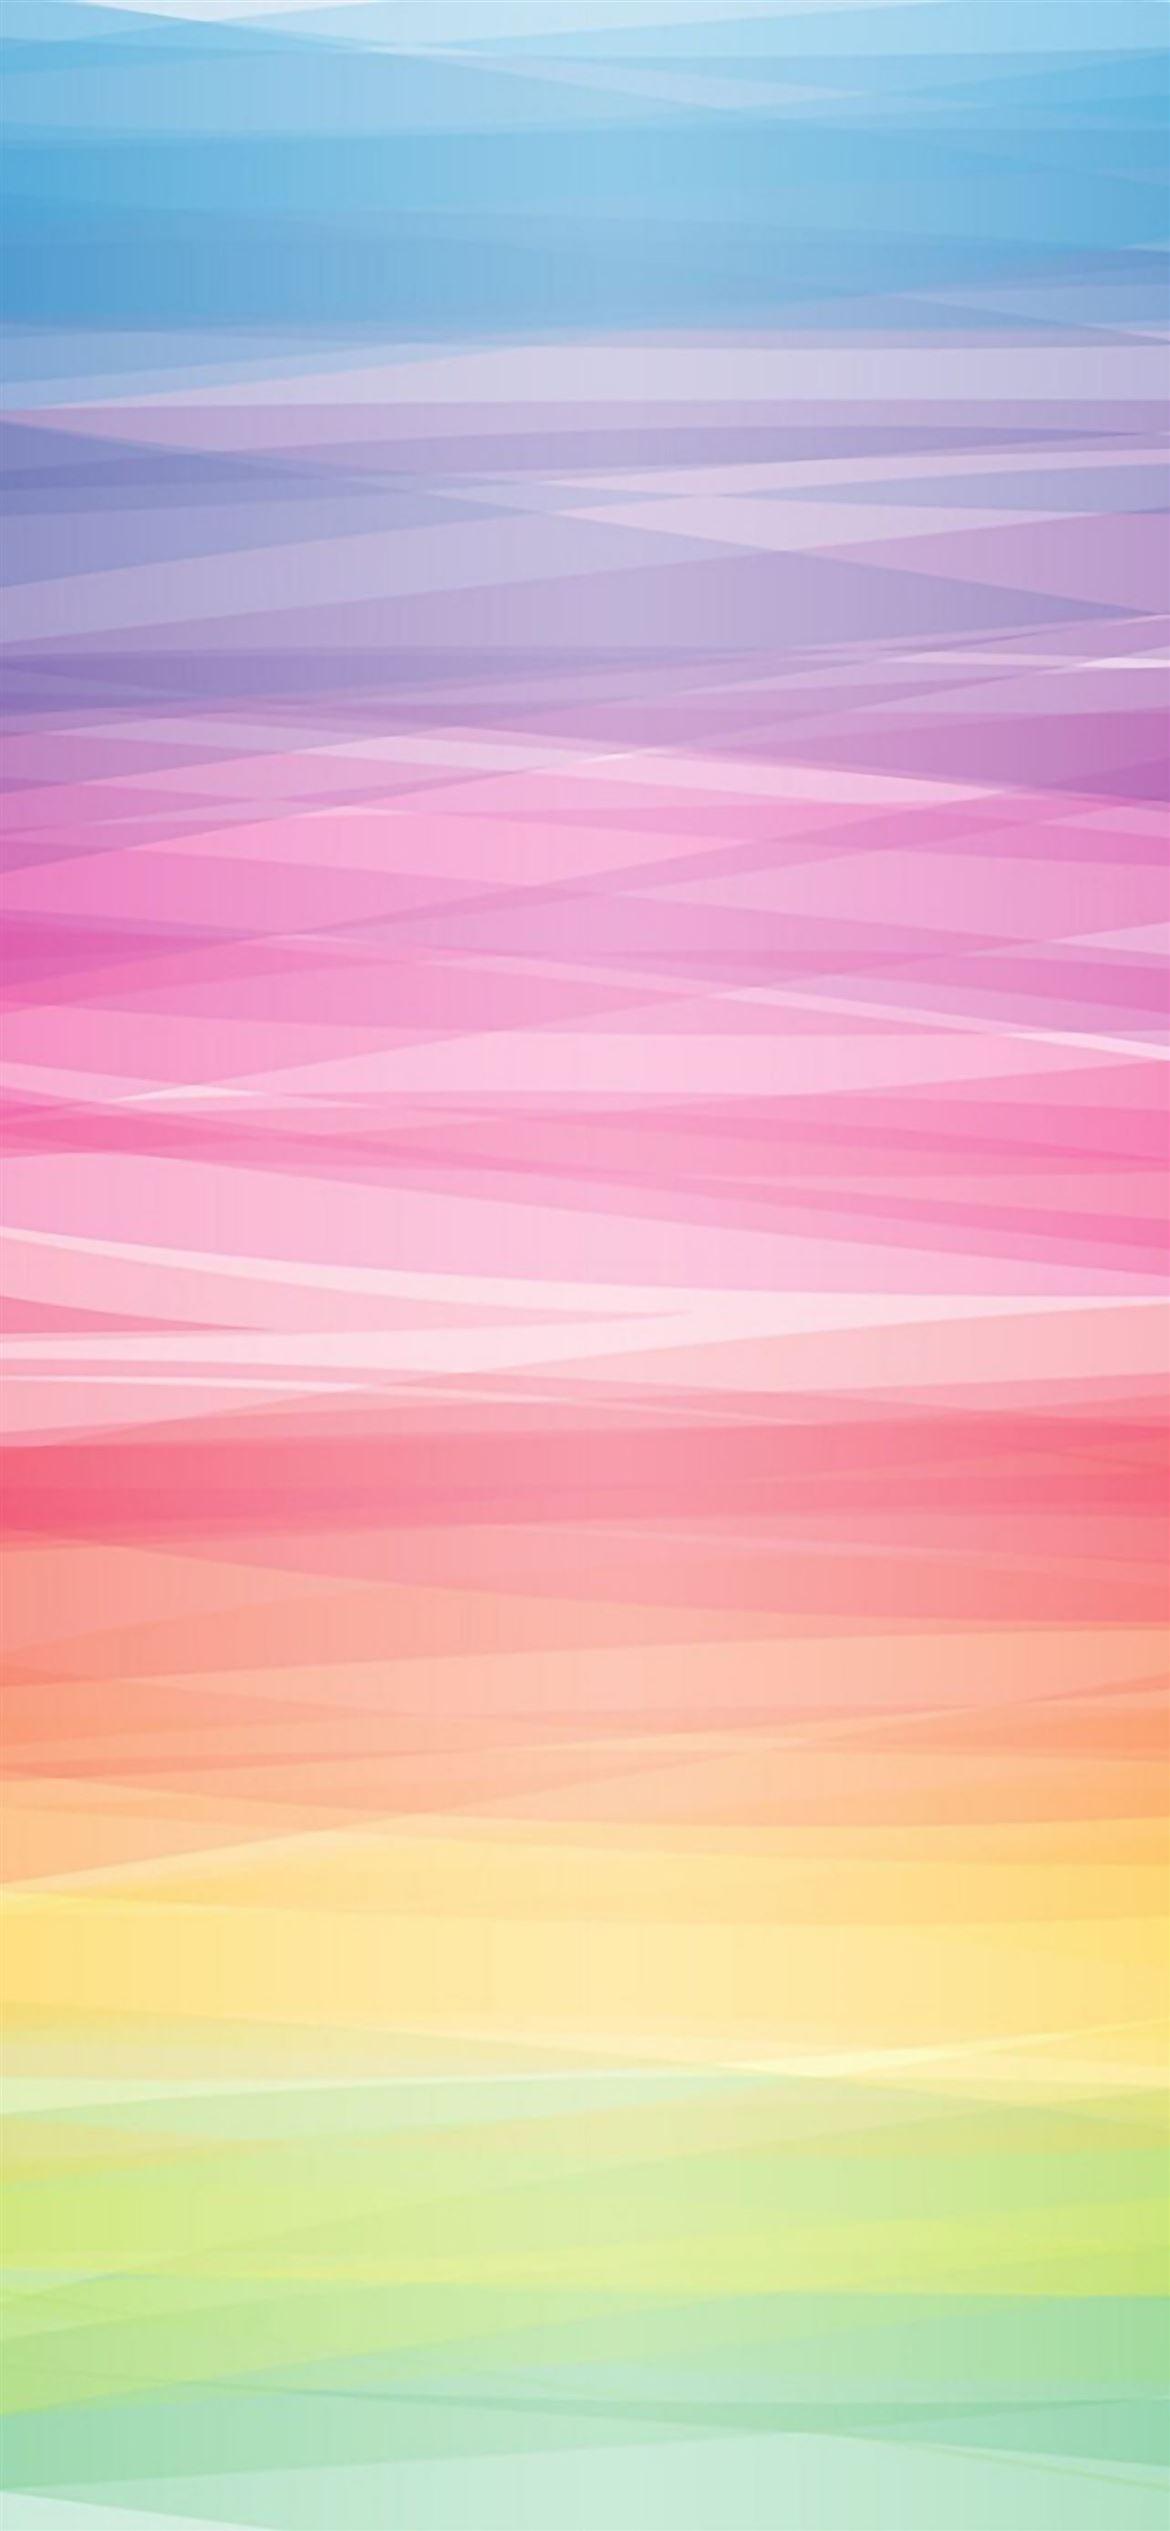 100+ Rainbow Backgrounds - World of Printables